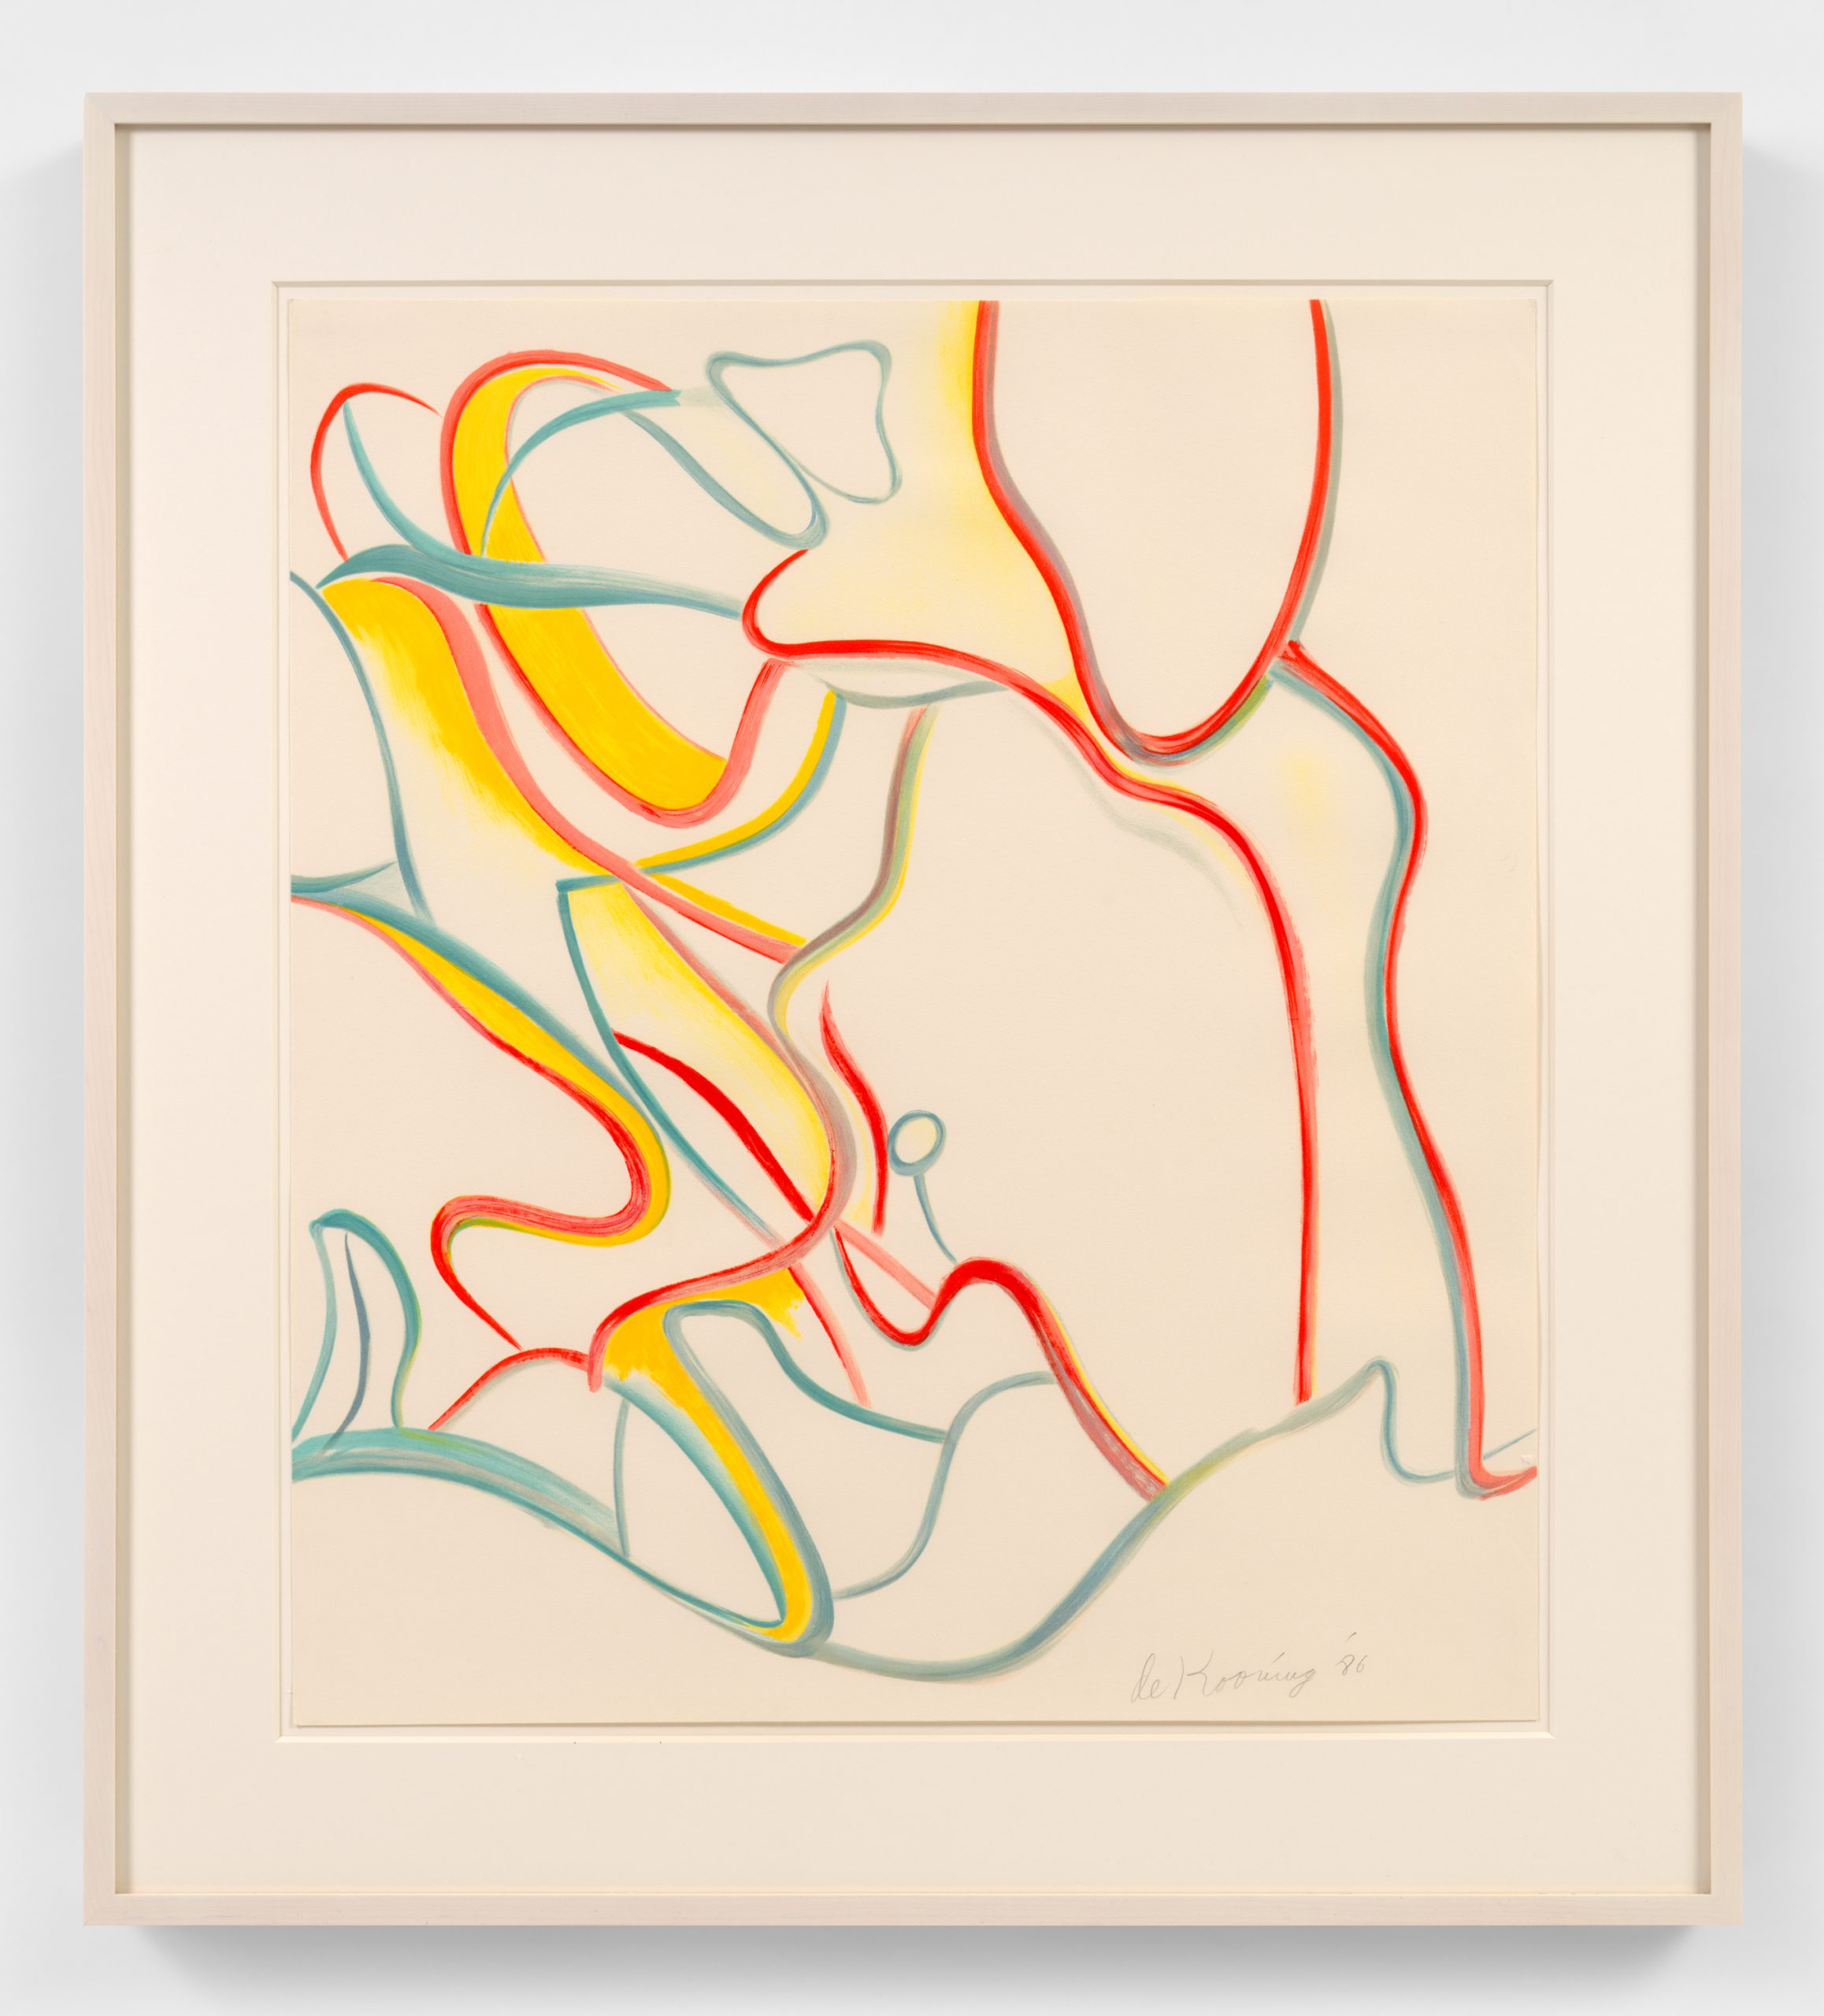 Untitled (Quatre Lithographies) by Willem de Kooning